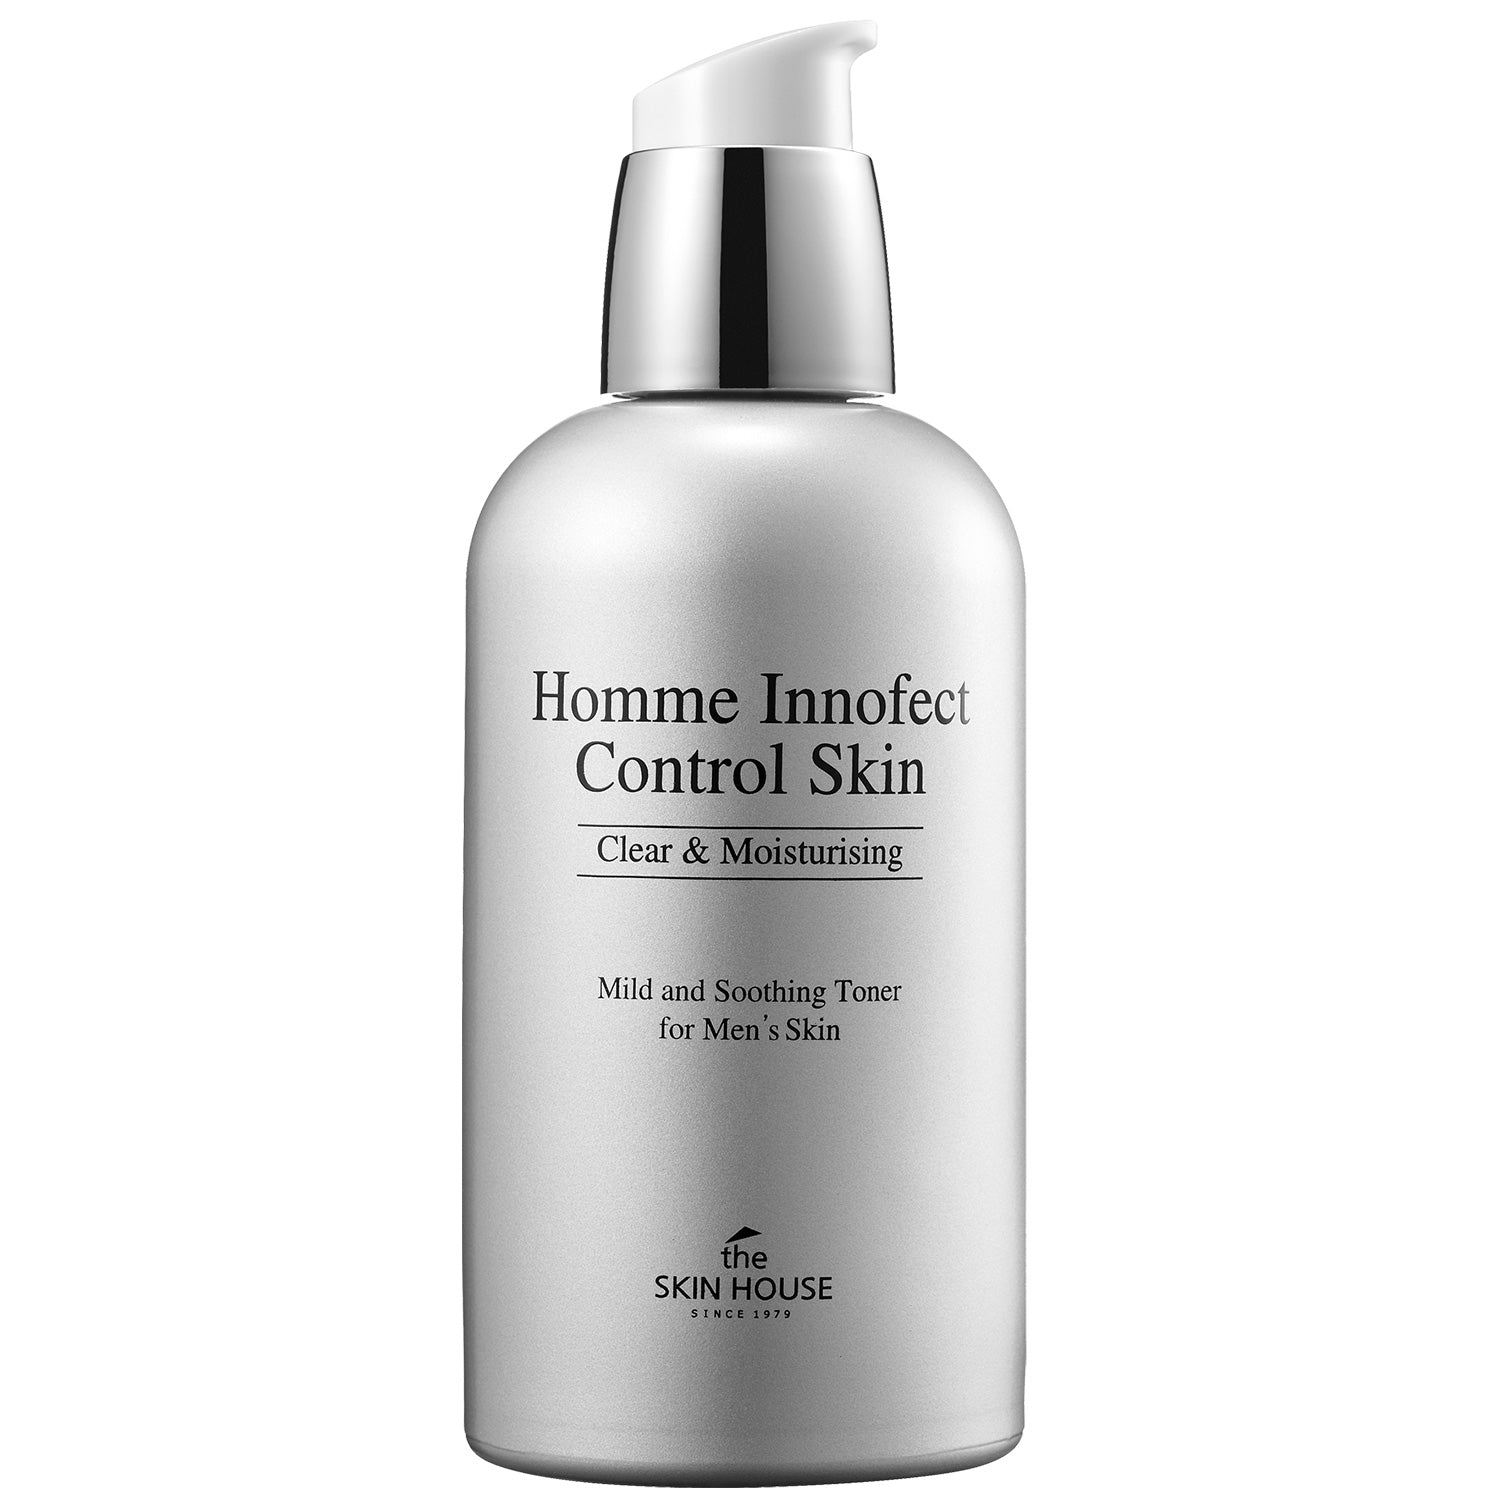 Homme Innofect Control Skin